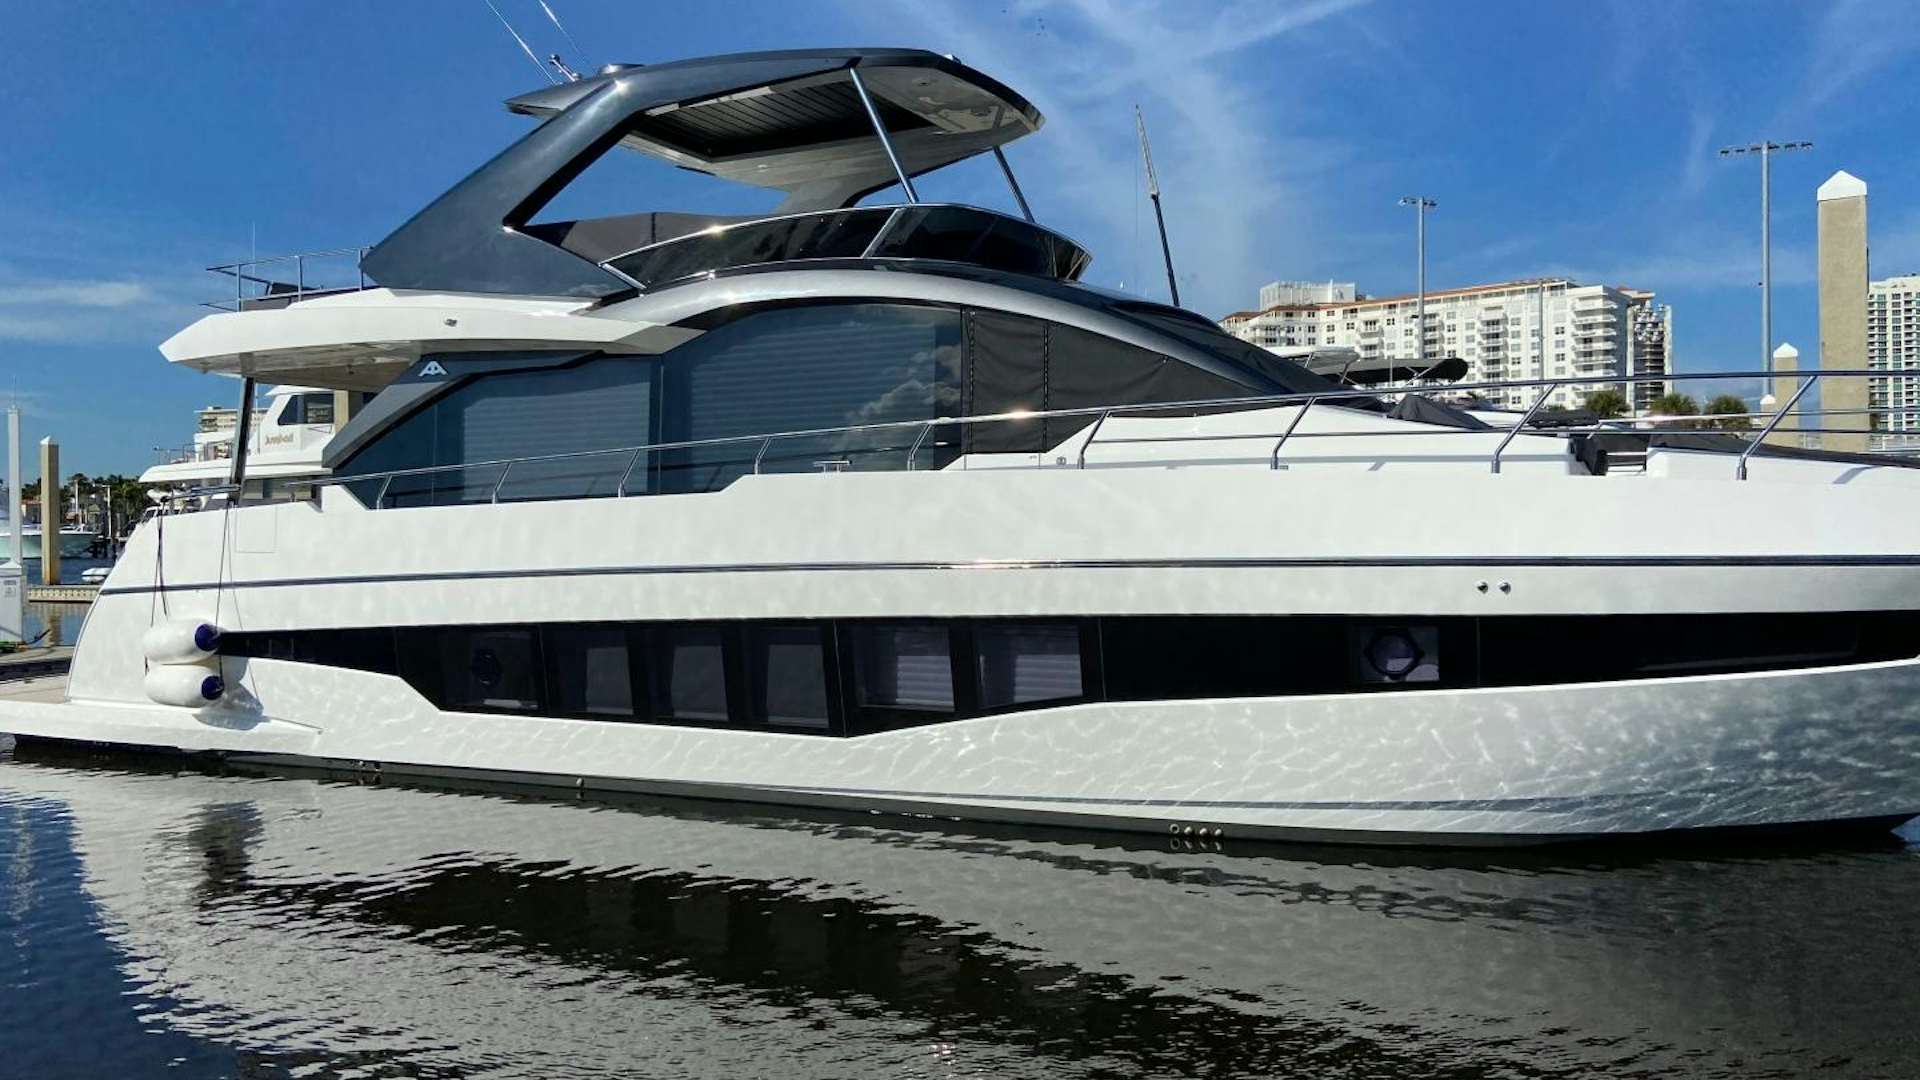 Agrodolce
Yacht for Sale